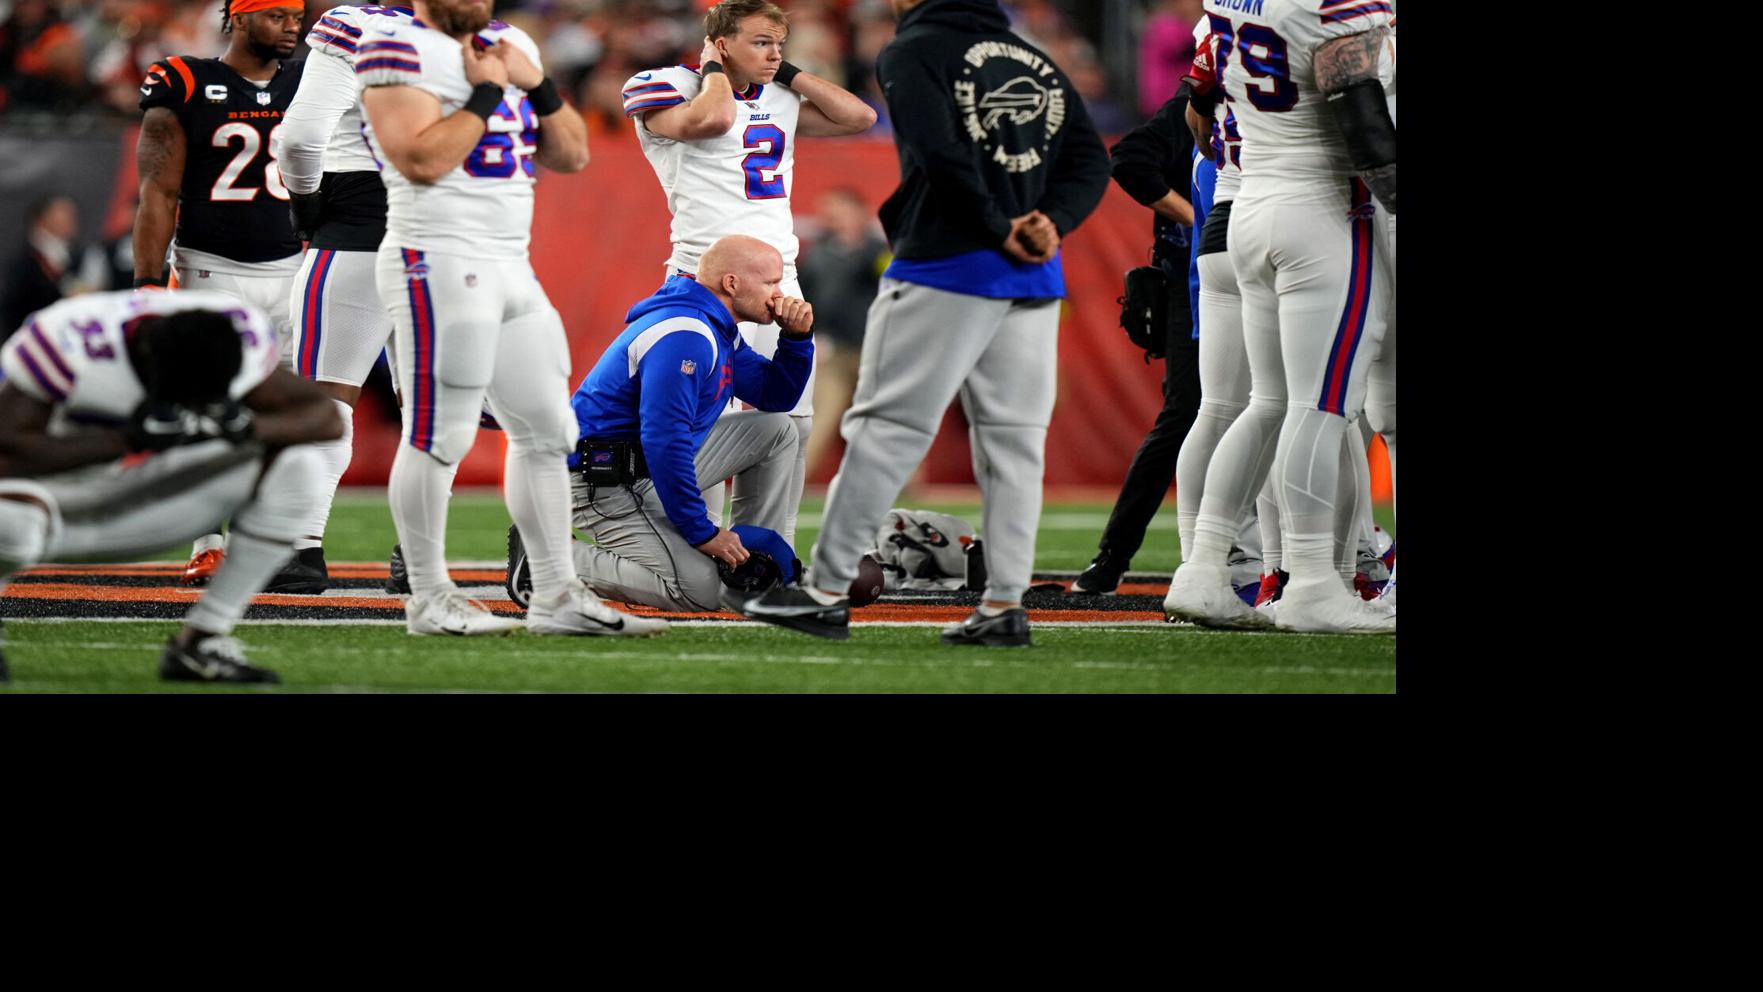 Bills-Bengals game won't be resumed this week after Damar Hamlin collapse,  NFL says